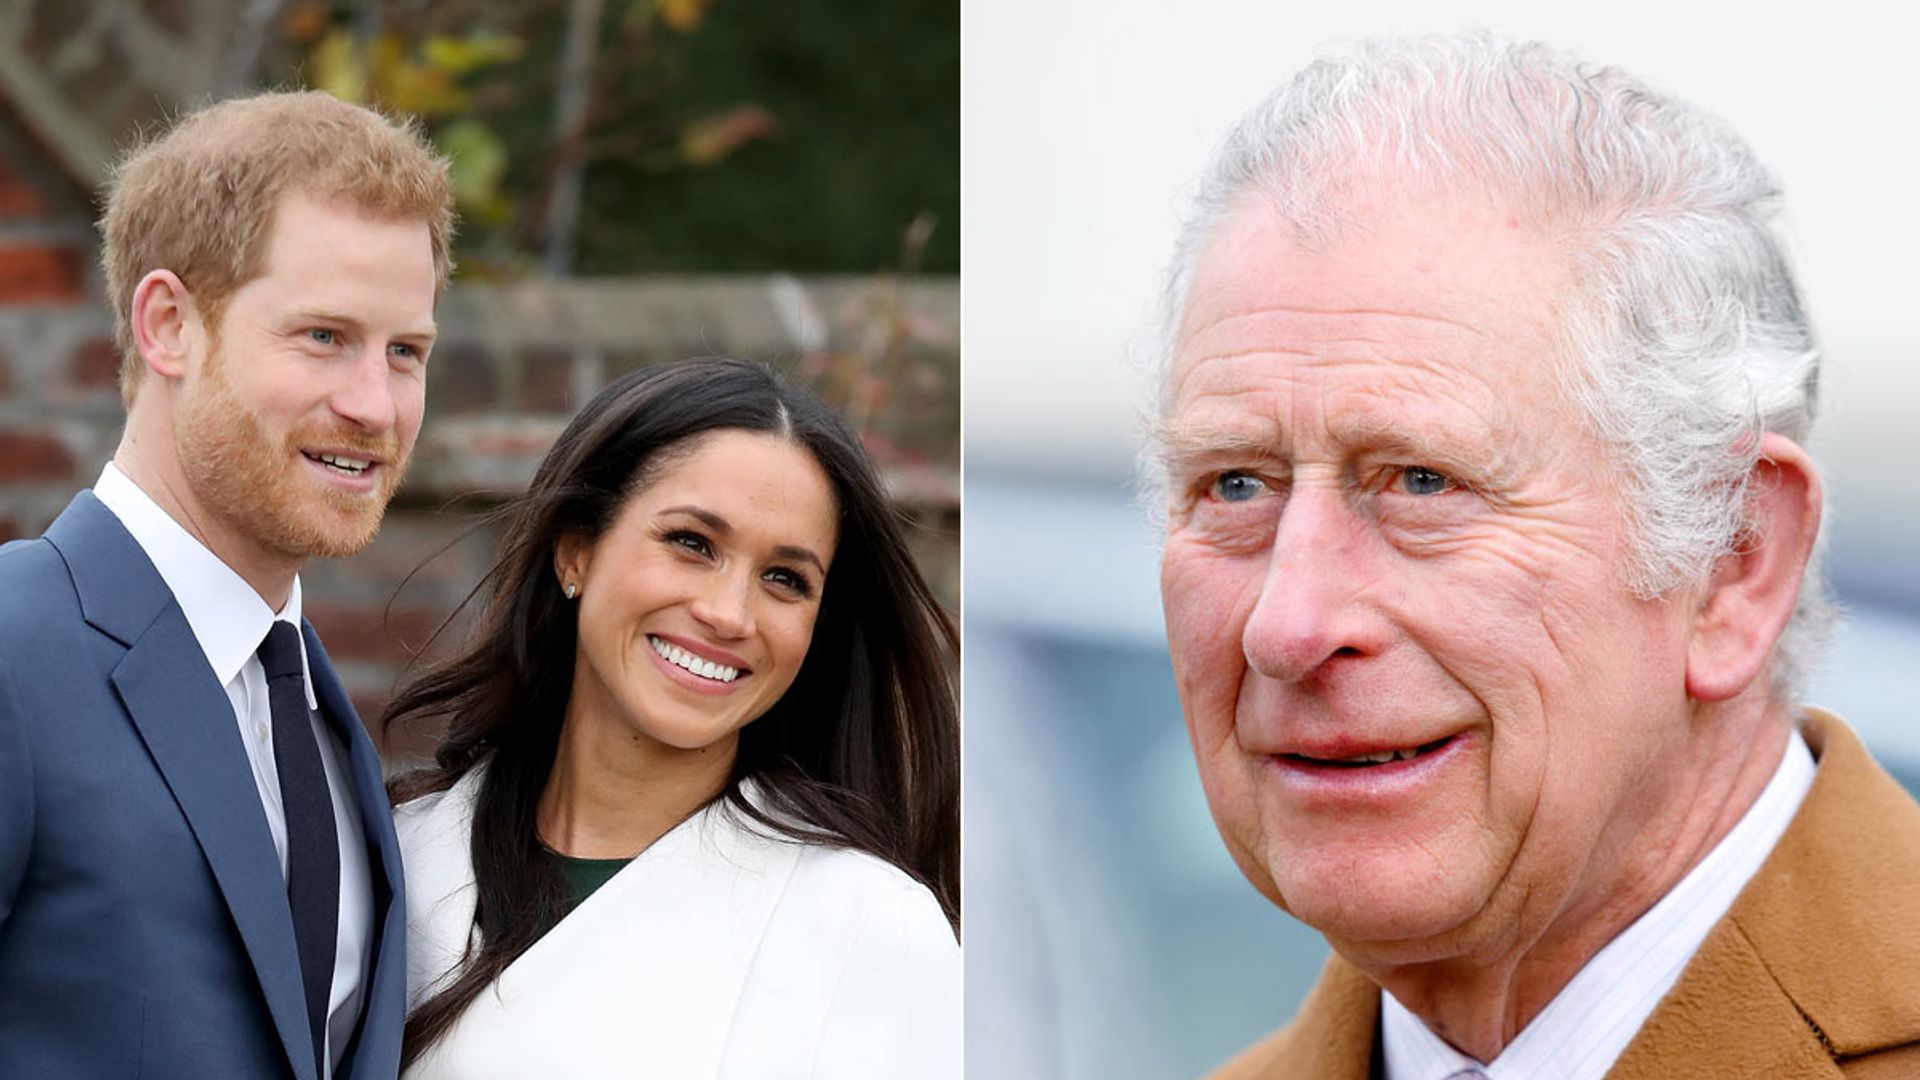 A split image of King Charles smiling and Prince Harry and Meghan Markle smiling